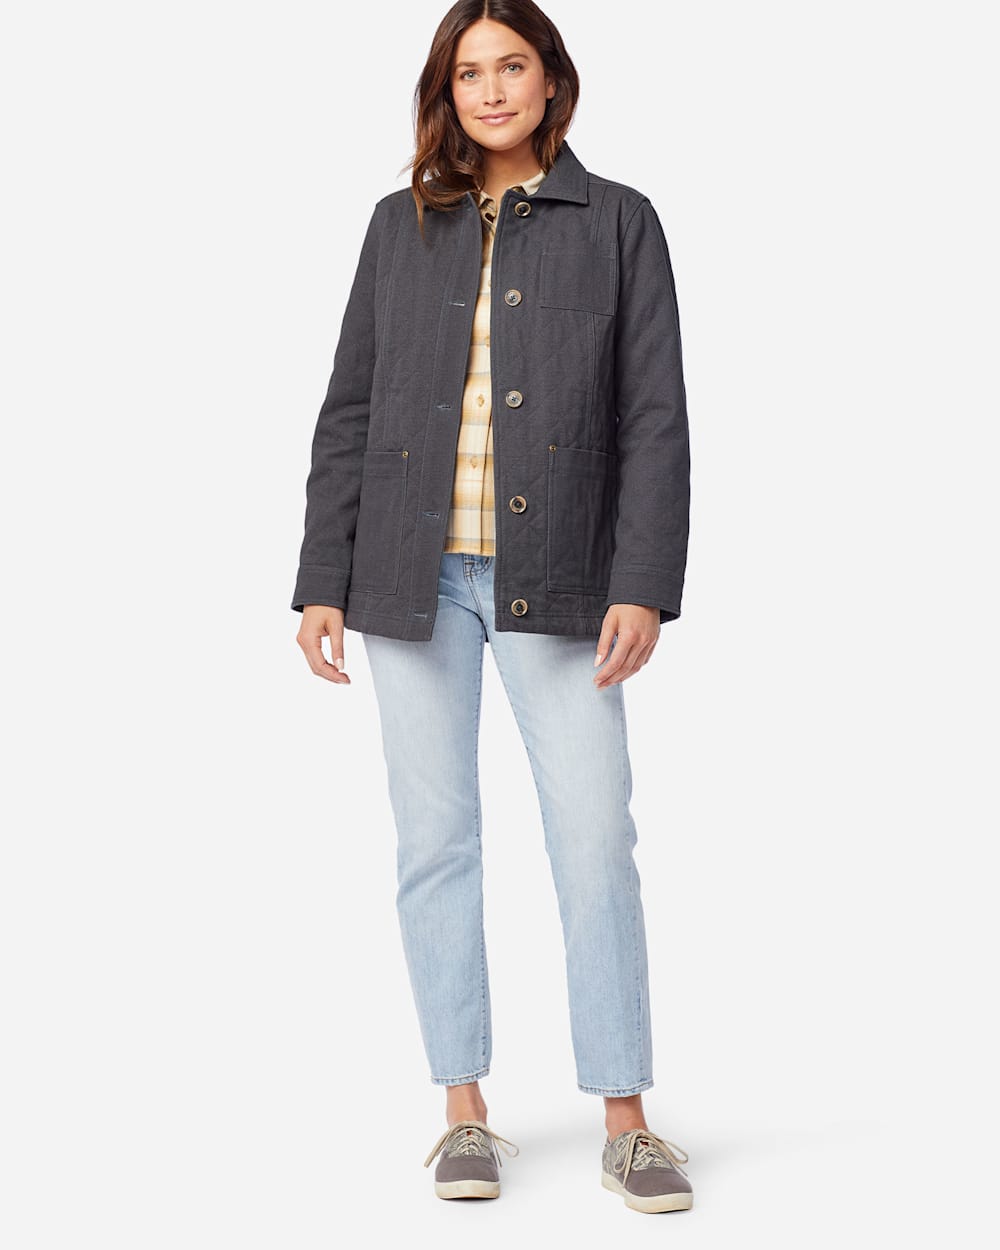 ALTERNATE VIEW OF WOMEN'S FERN QUILTED CANVAS BARN COAT IN SLATE GREY image number 2